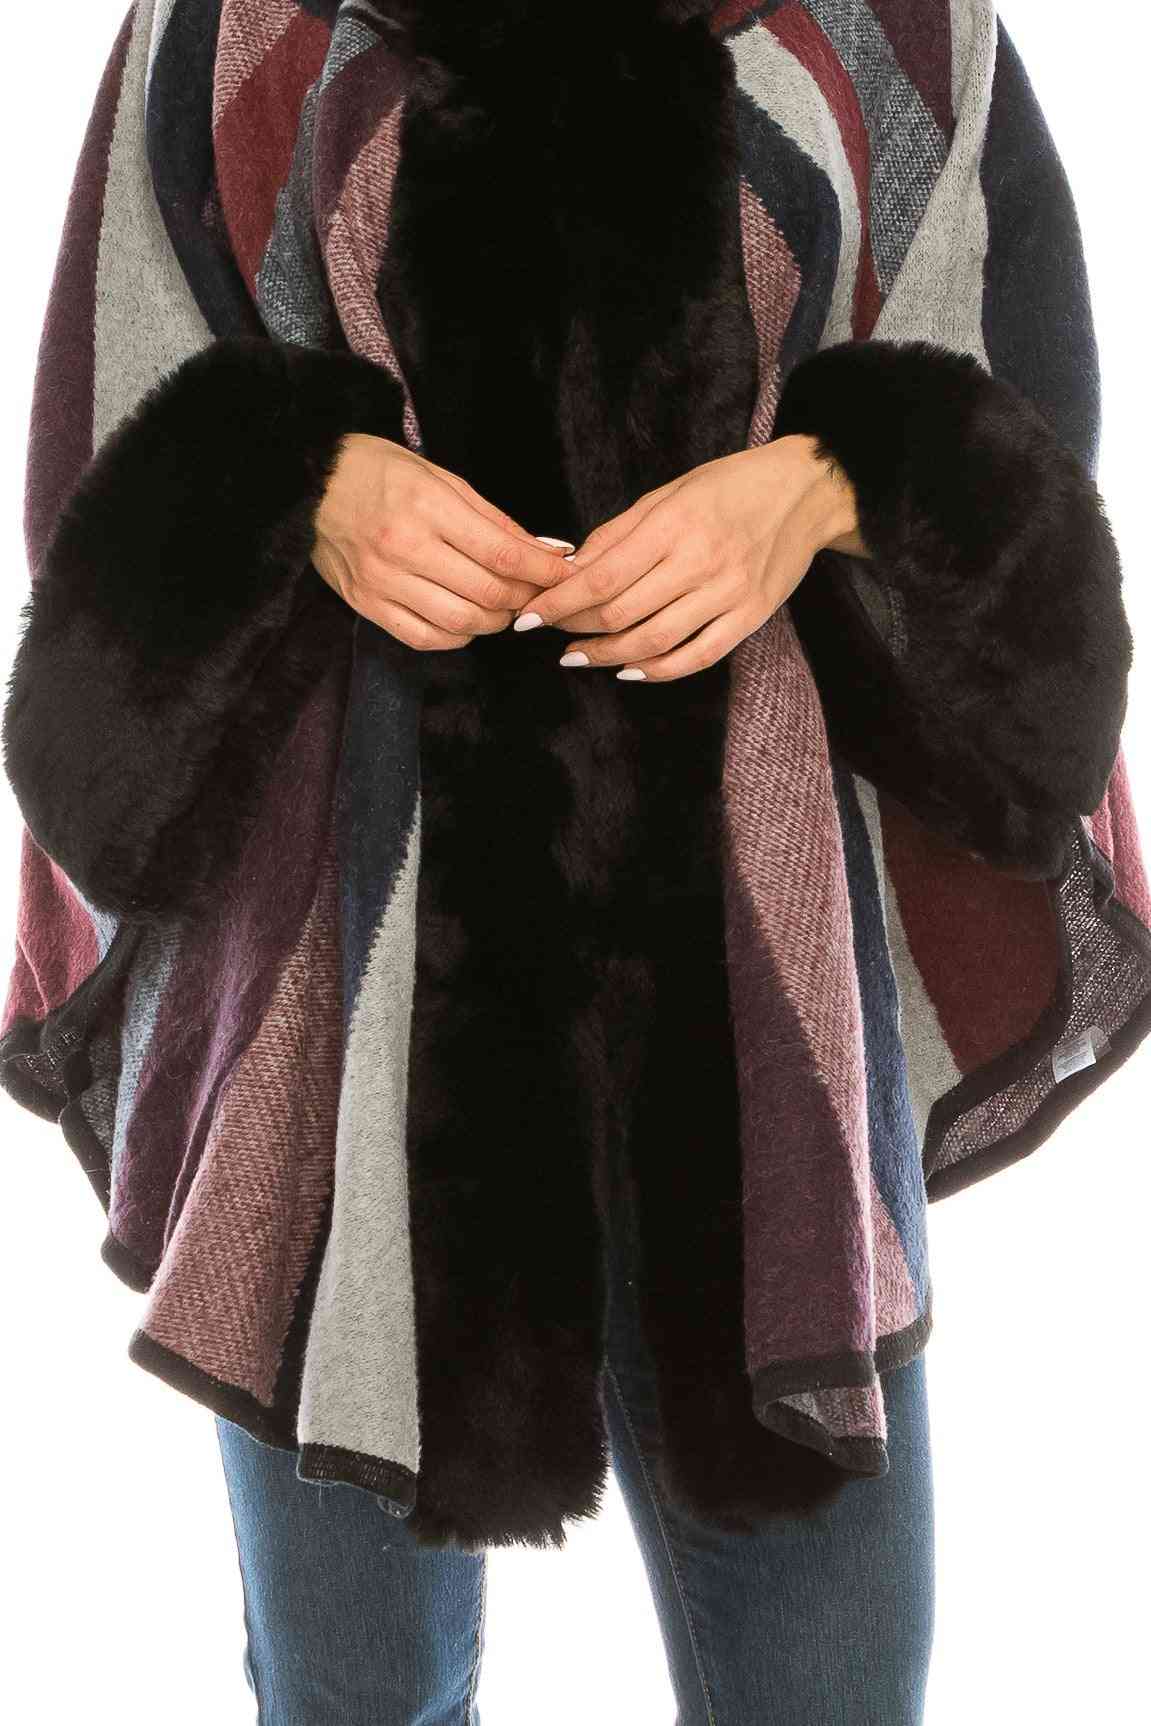 Sioni Multi Panel Printed, Fur Trimmed, Hooded Poncho Cape